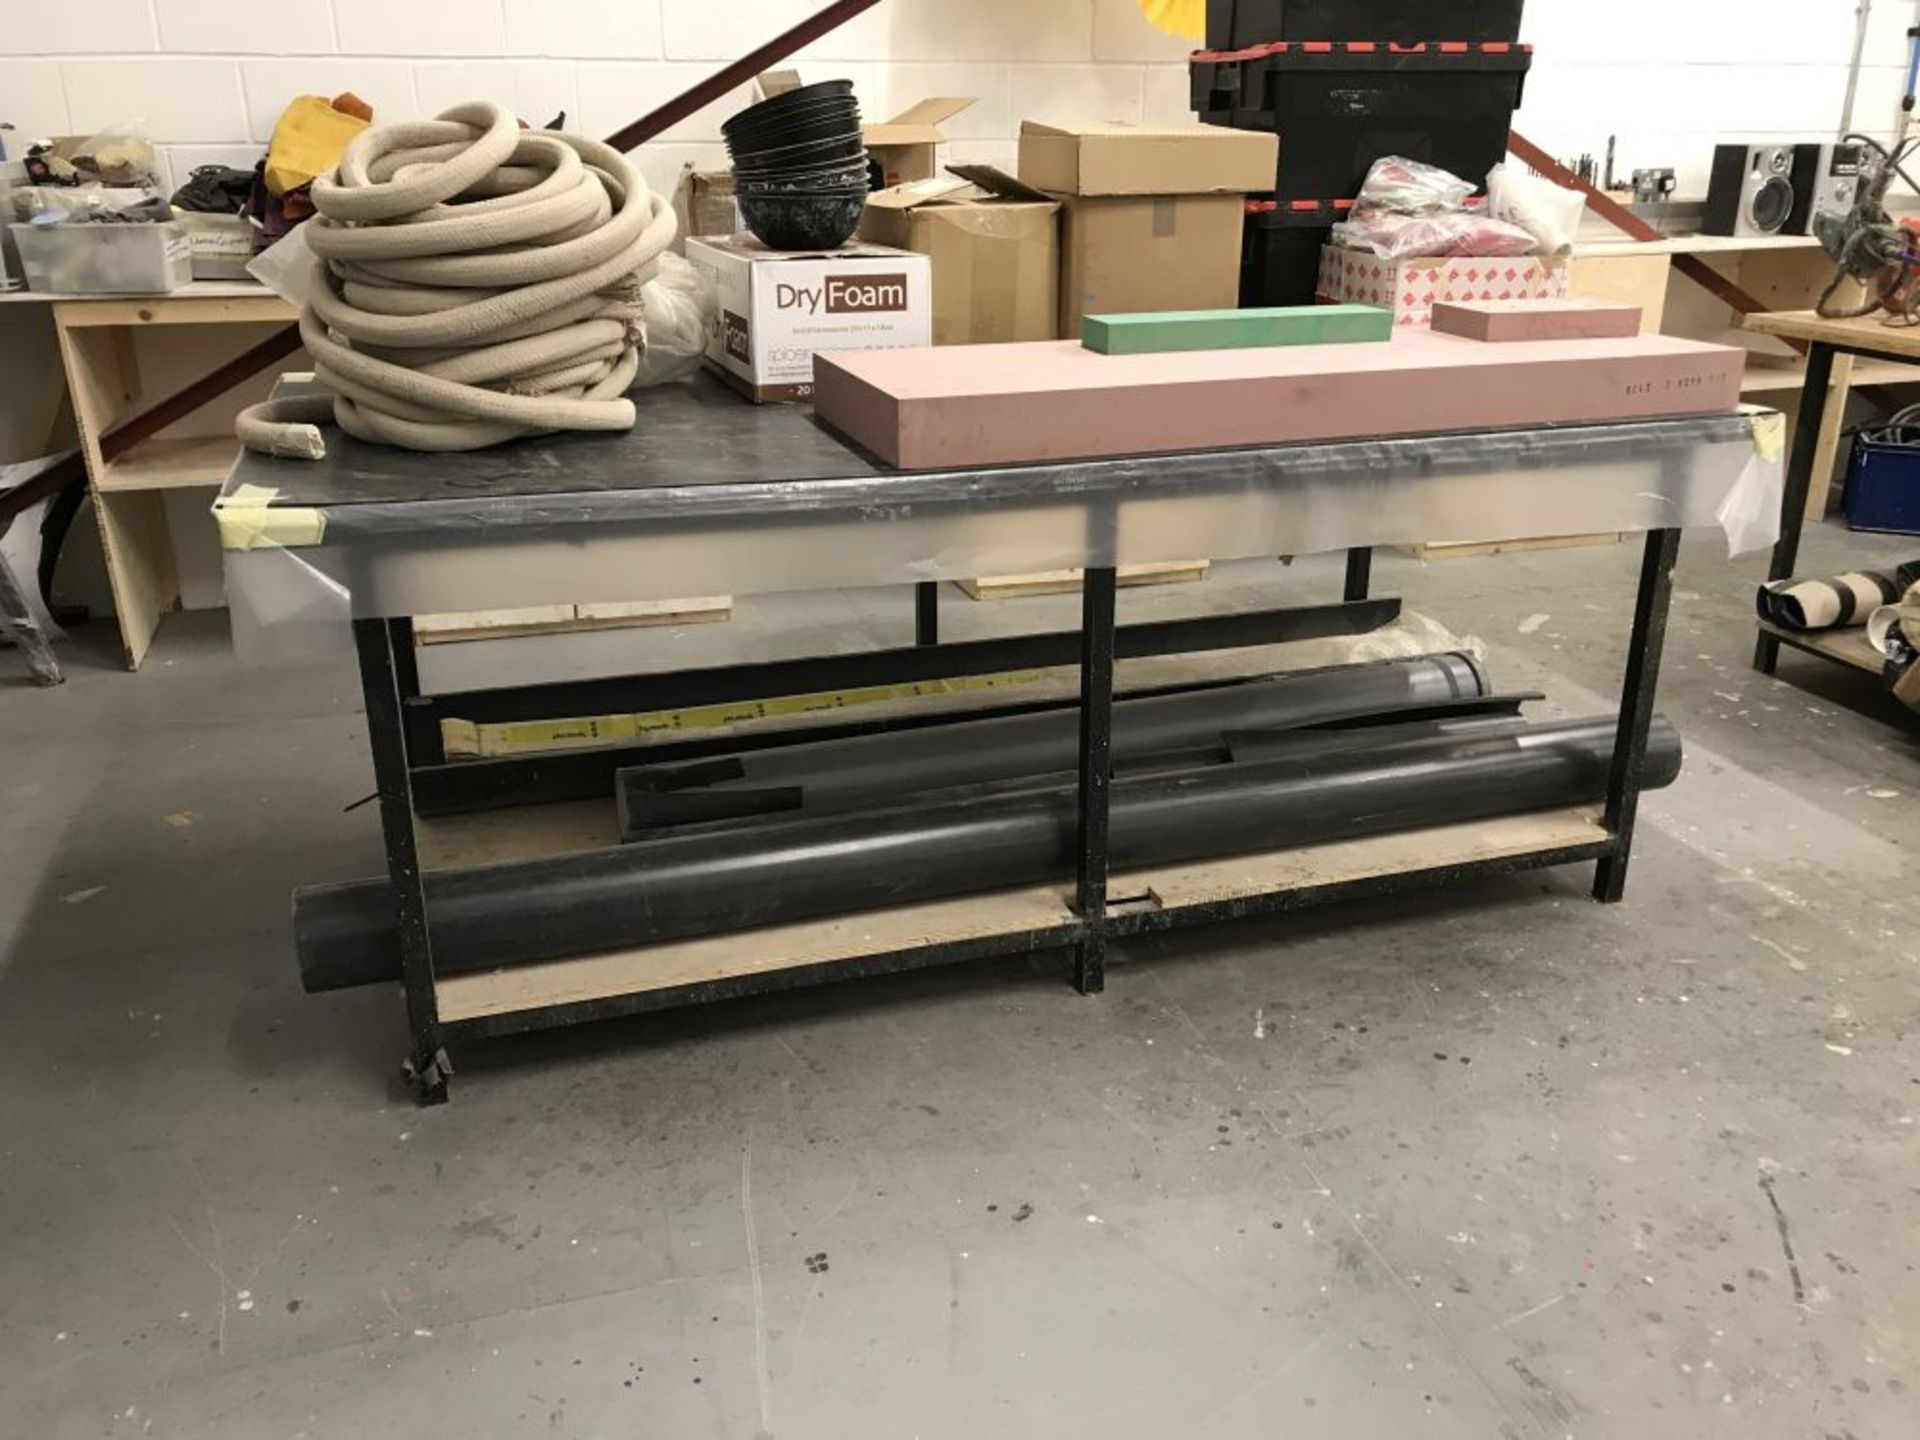 Steel framed bench with rubber surface